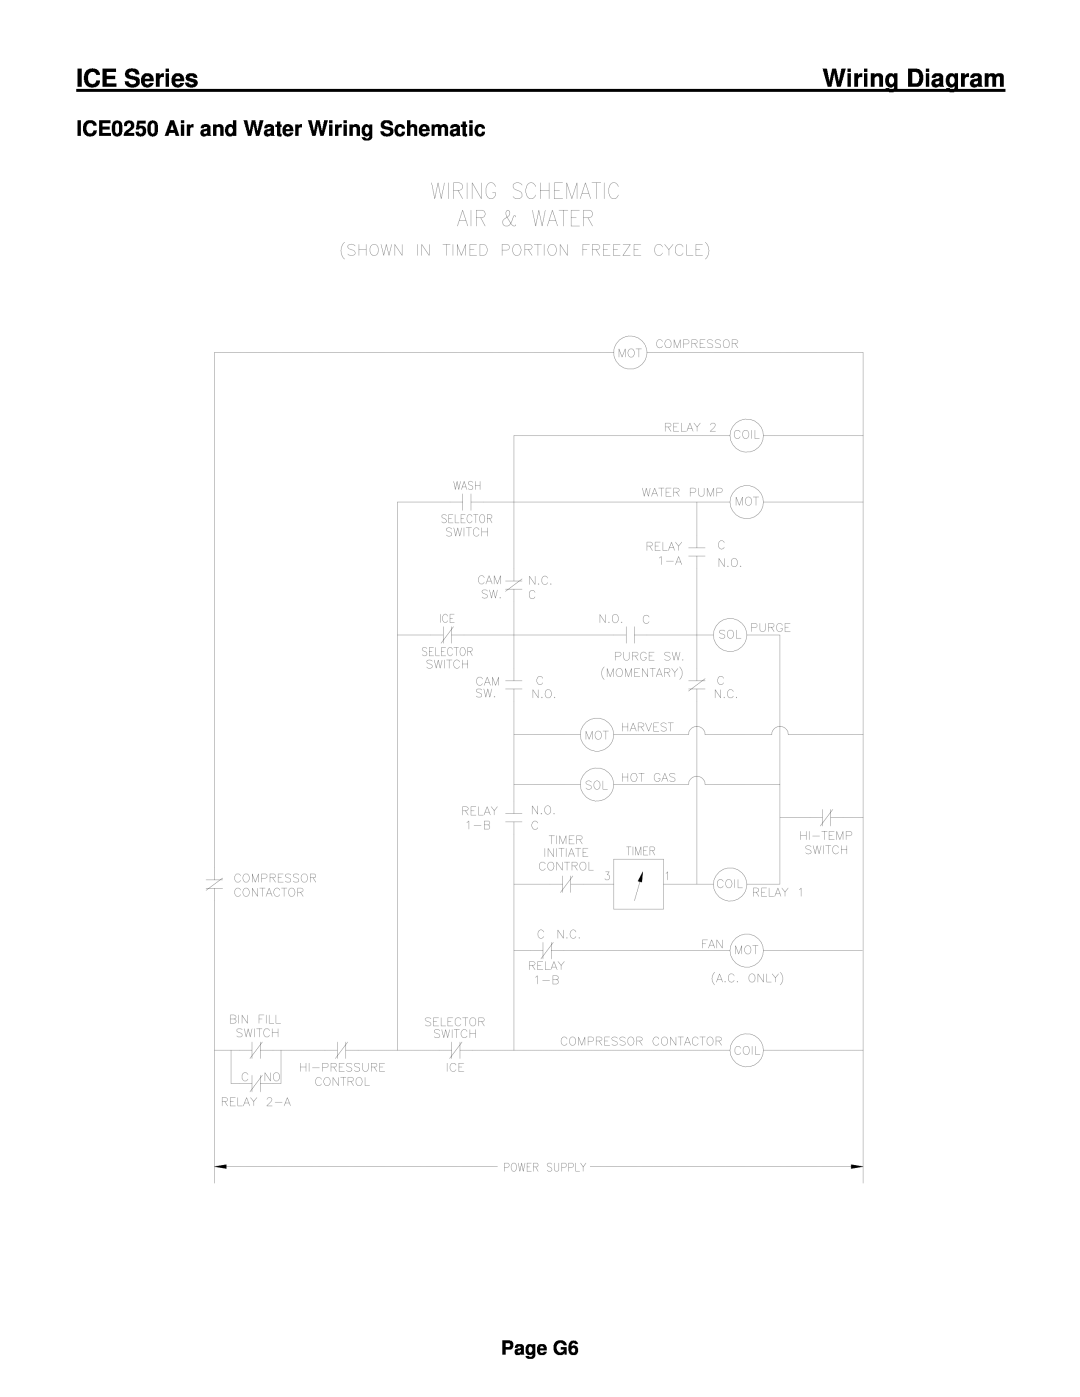 Ice-O-Matic ICE0250 Series installation manual ICE0250 Air and Water Wiring Schematic, ICE Series, Wiring Diagram, Page G6 